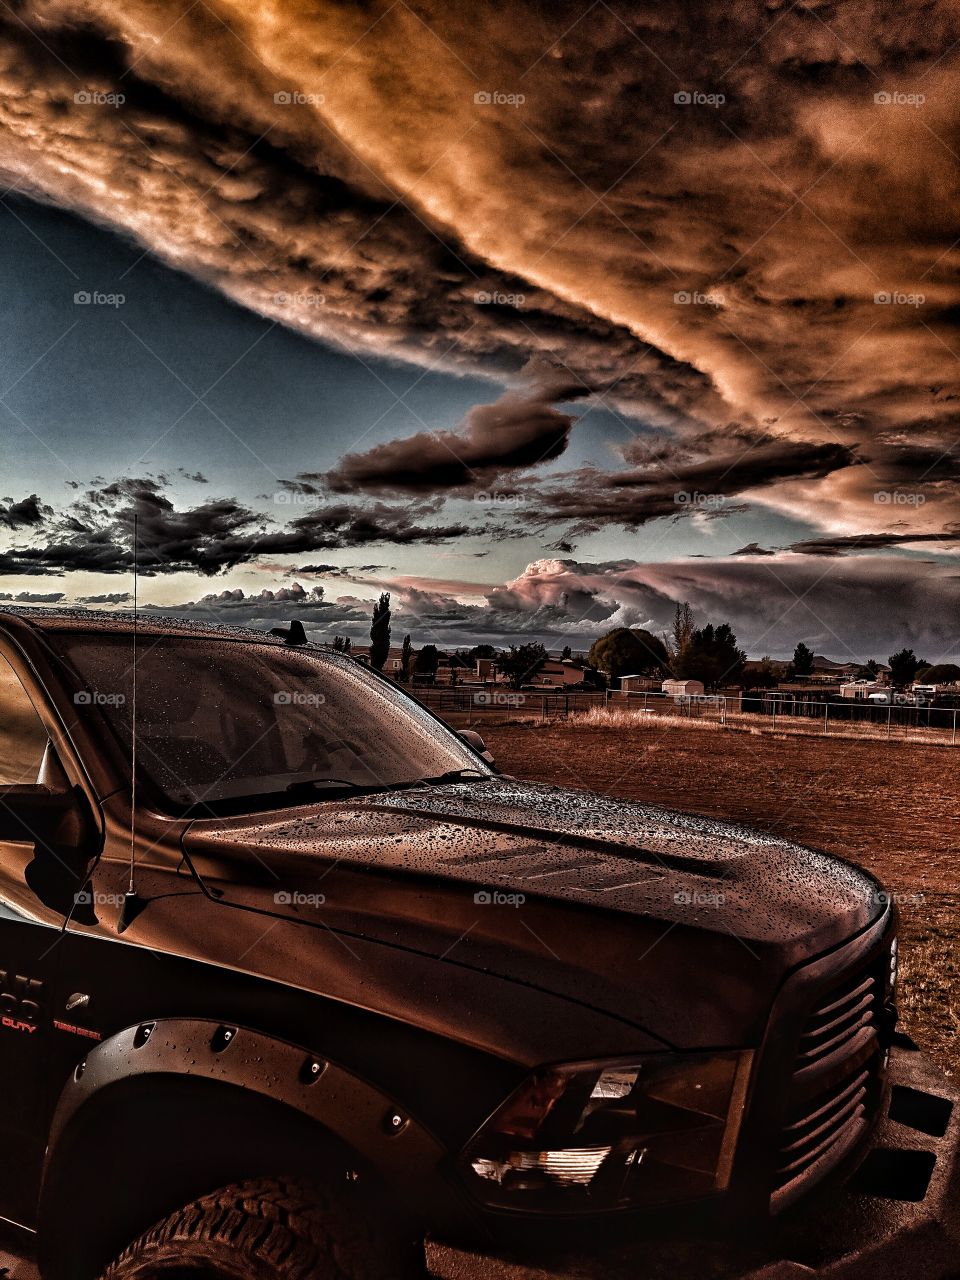 Truck after the storm under apocalyptic skies in the desert.